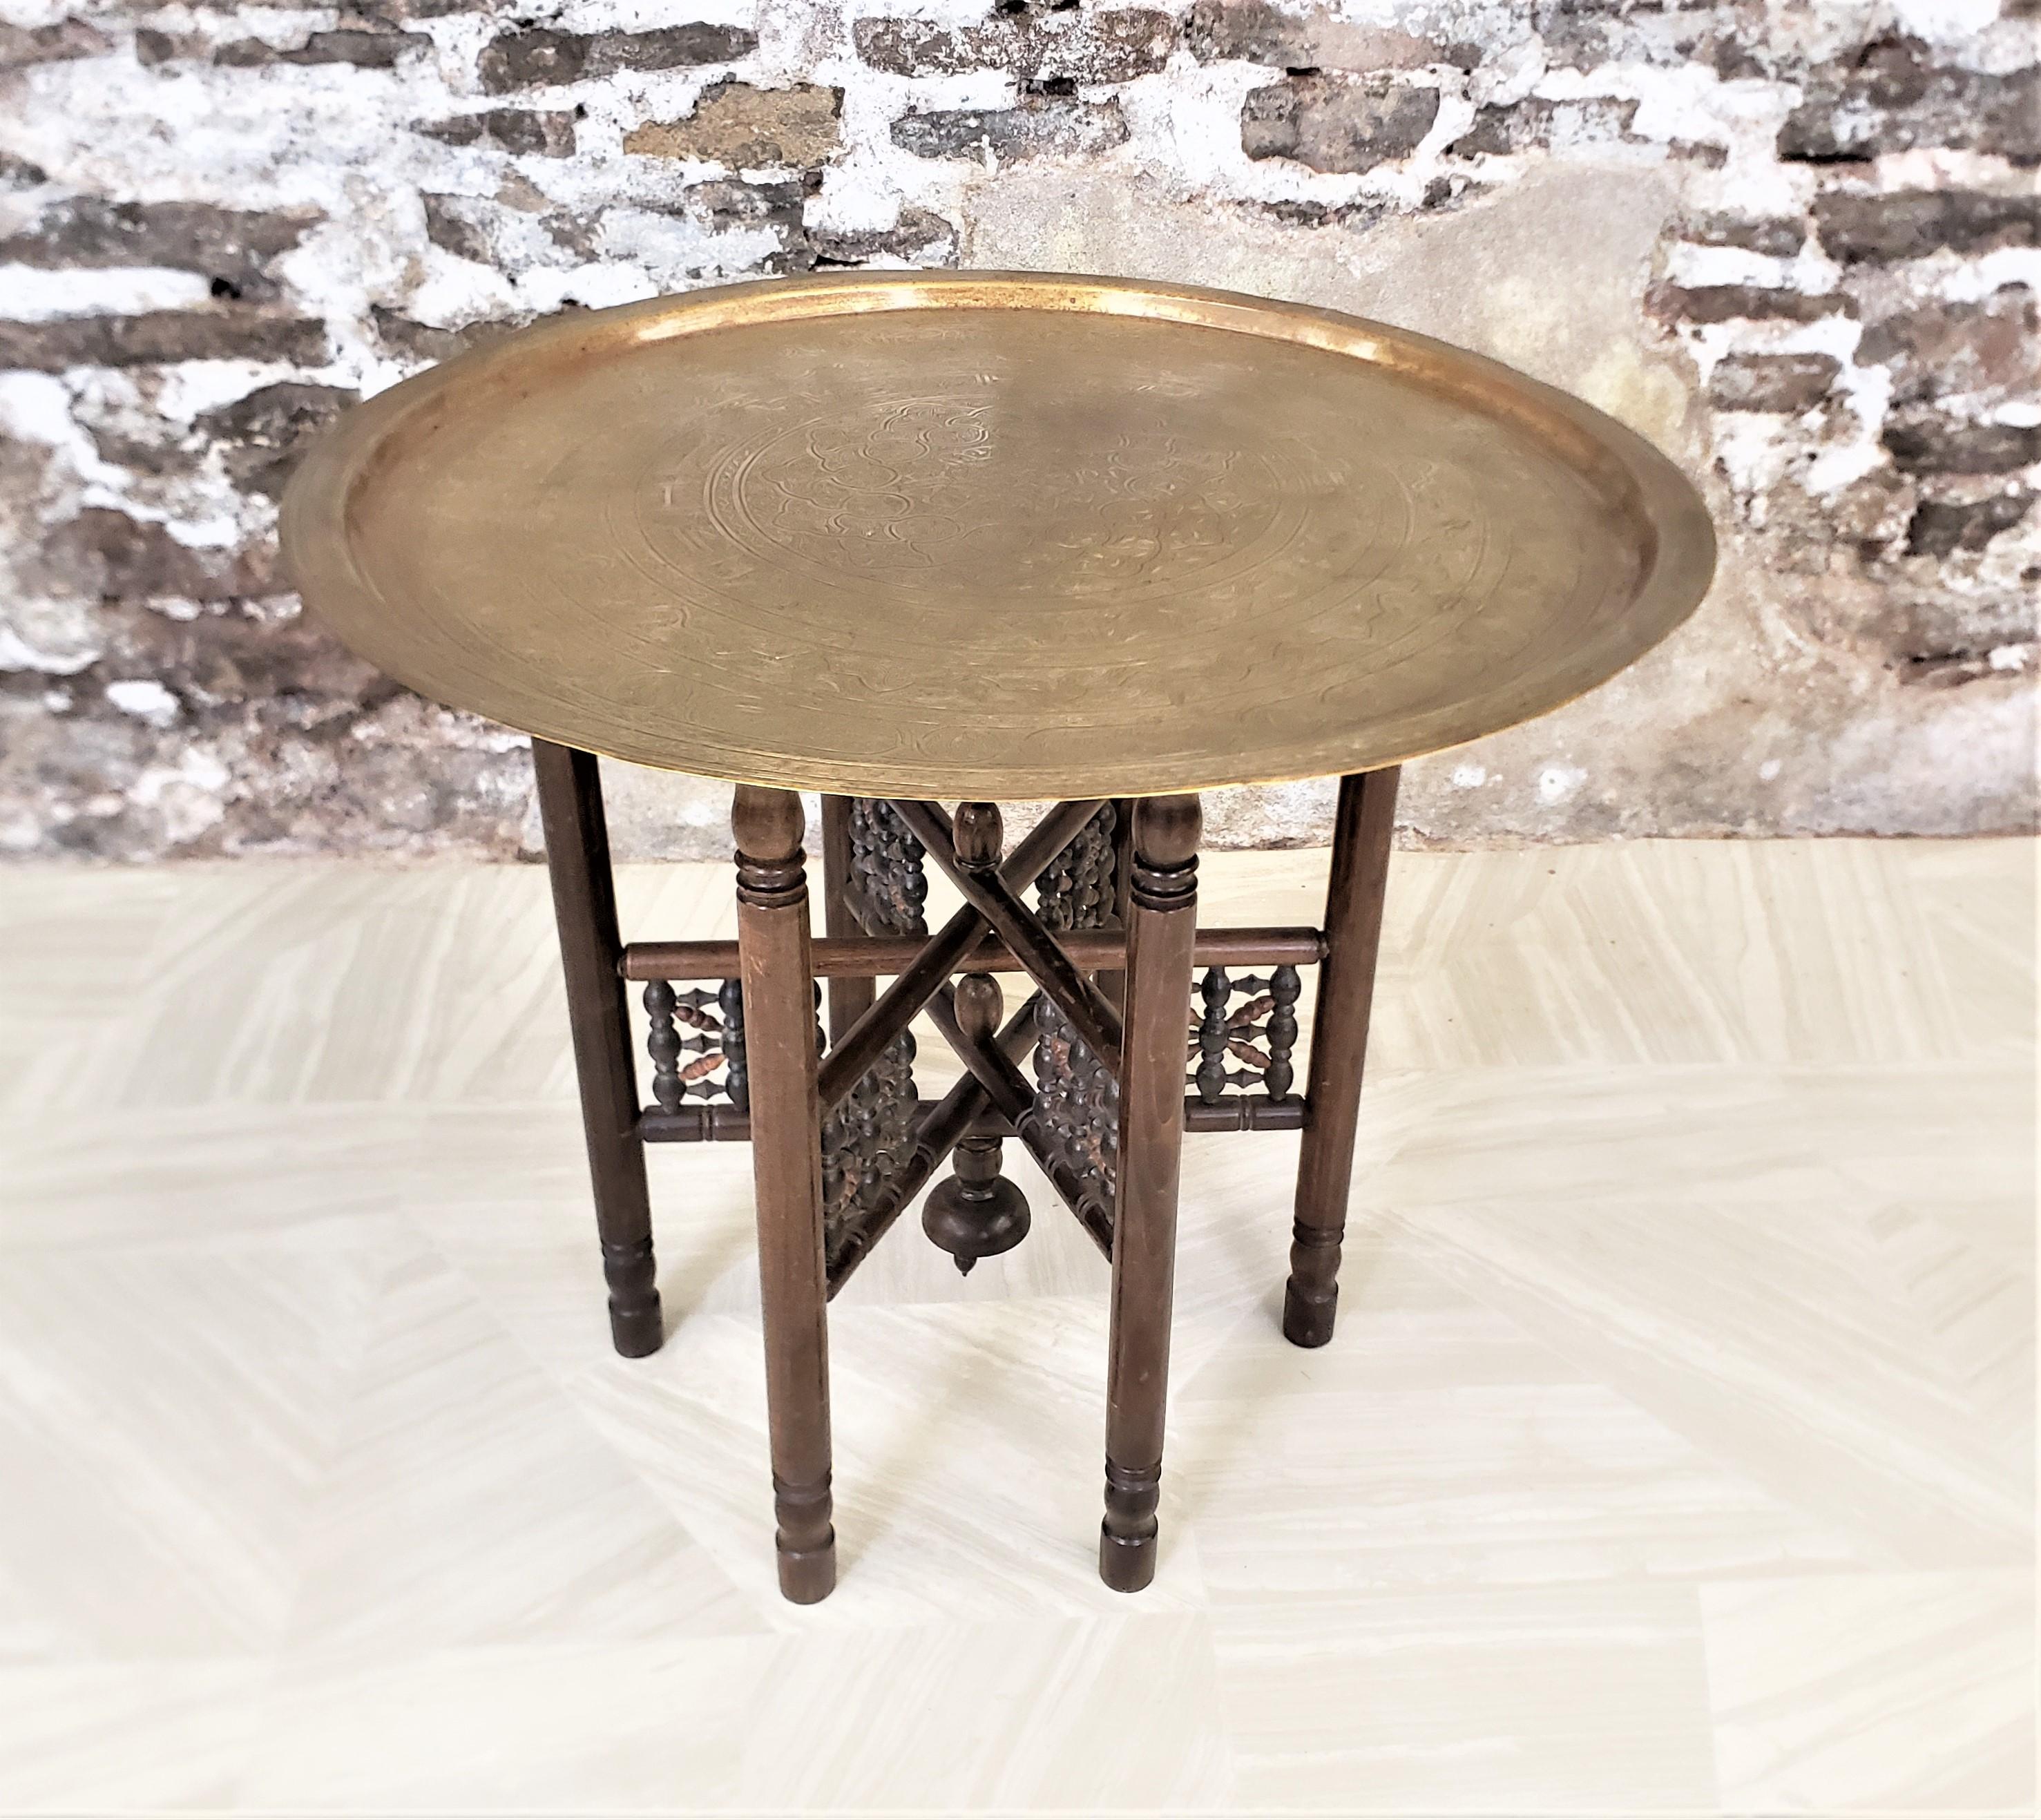 Machine-Made Large Anglo-Indian Brass Tray Folding Table with Engraved Top and Wooden Base